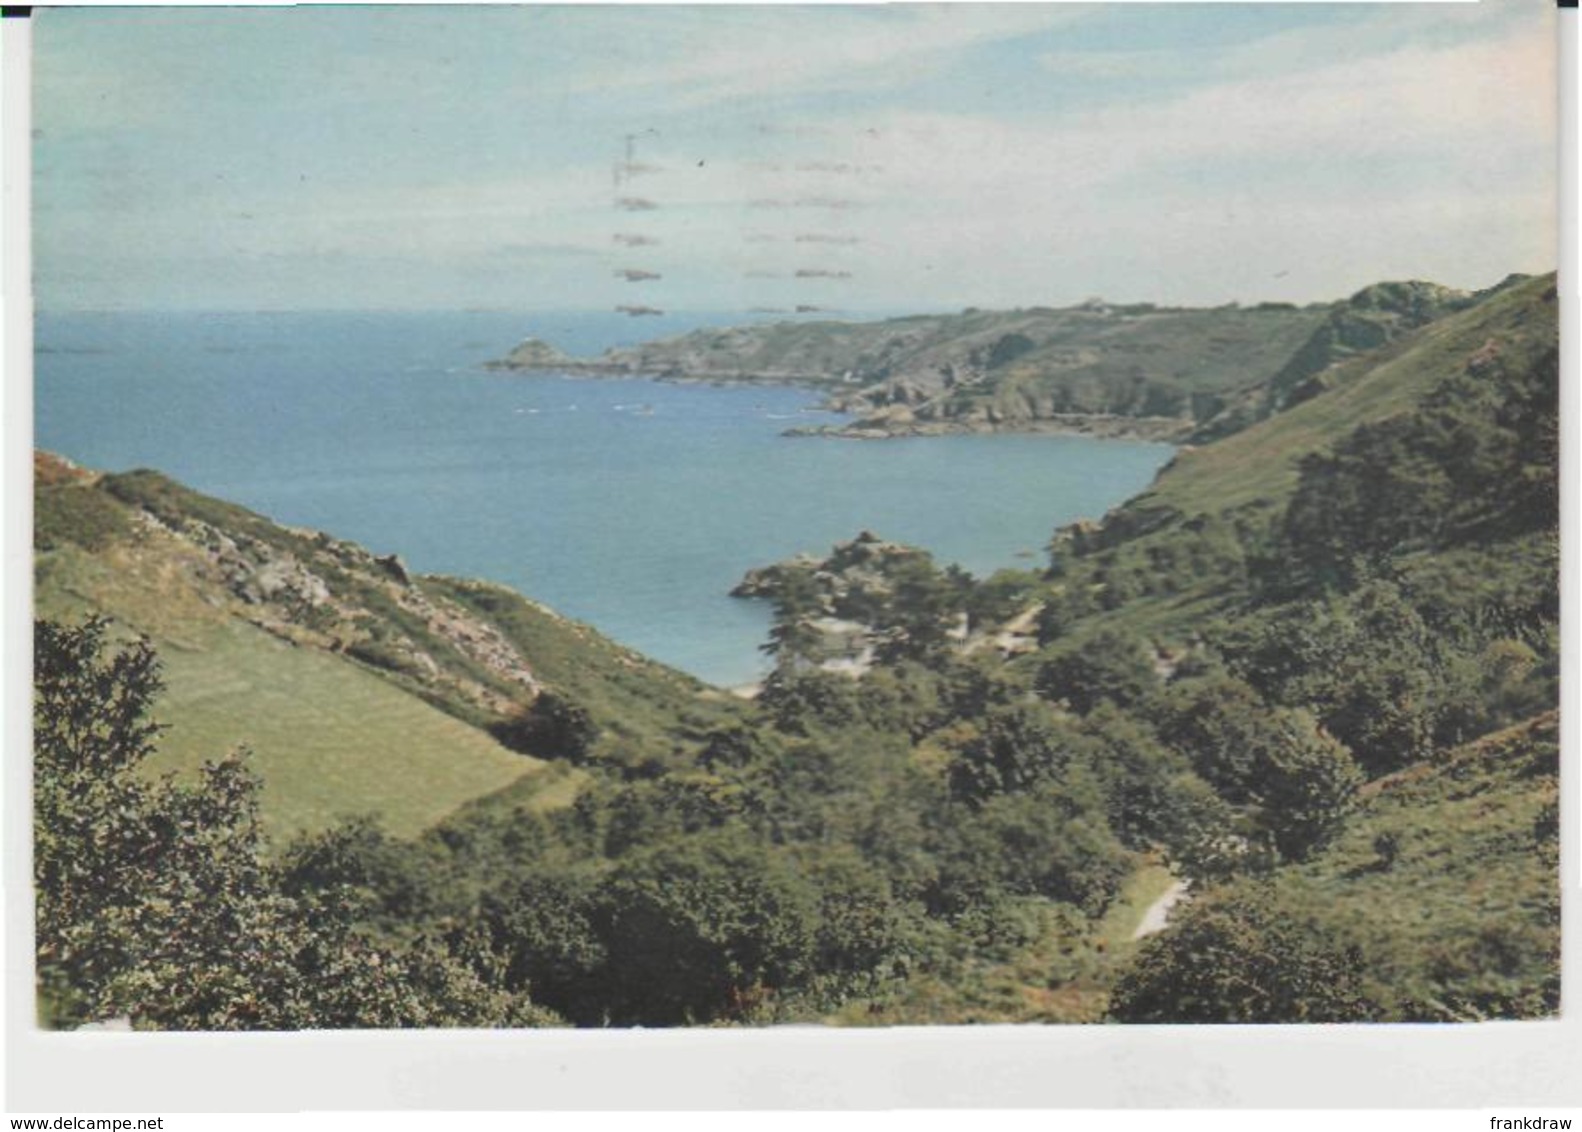 Postcard - Bouley Bay, Jersey - Posted 19th Aug 1958  Very Good - Ohne Zuordnung